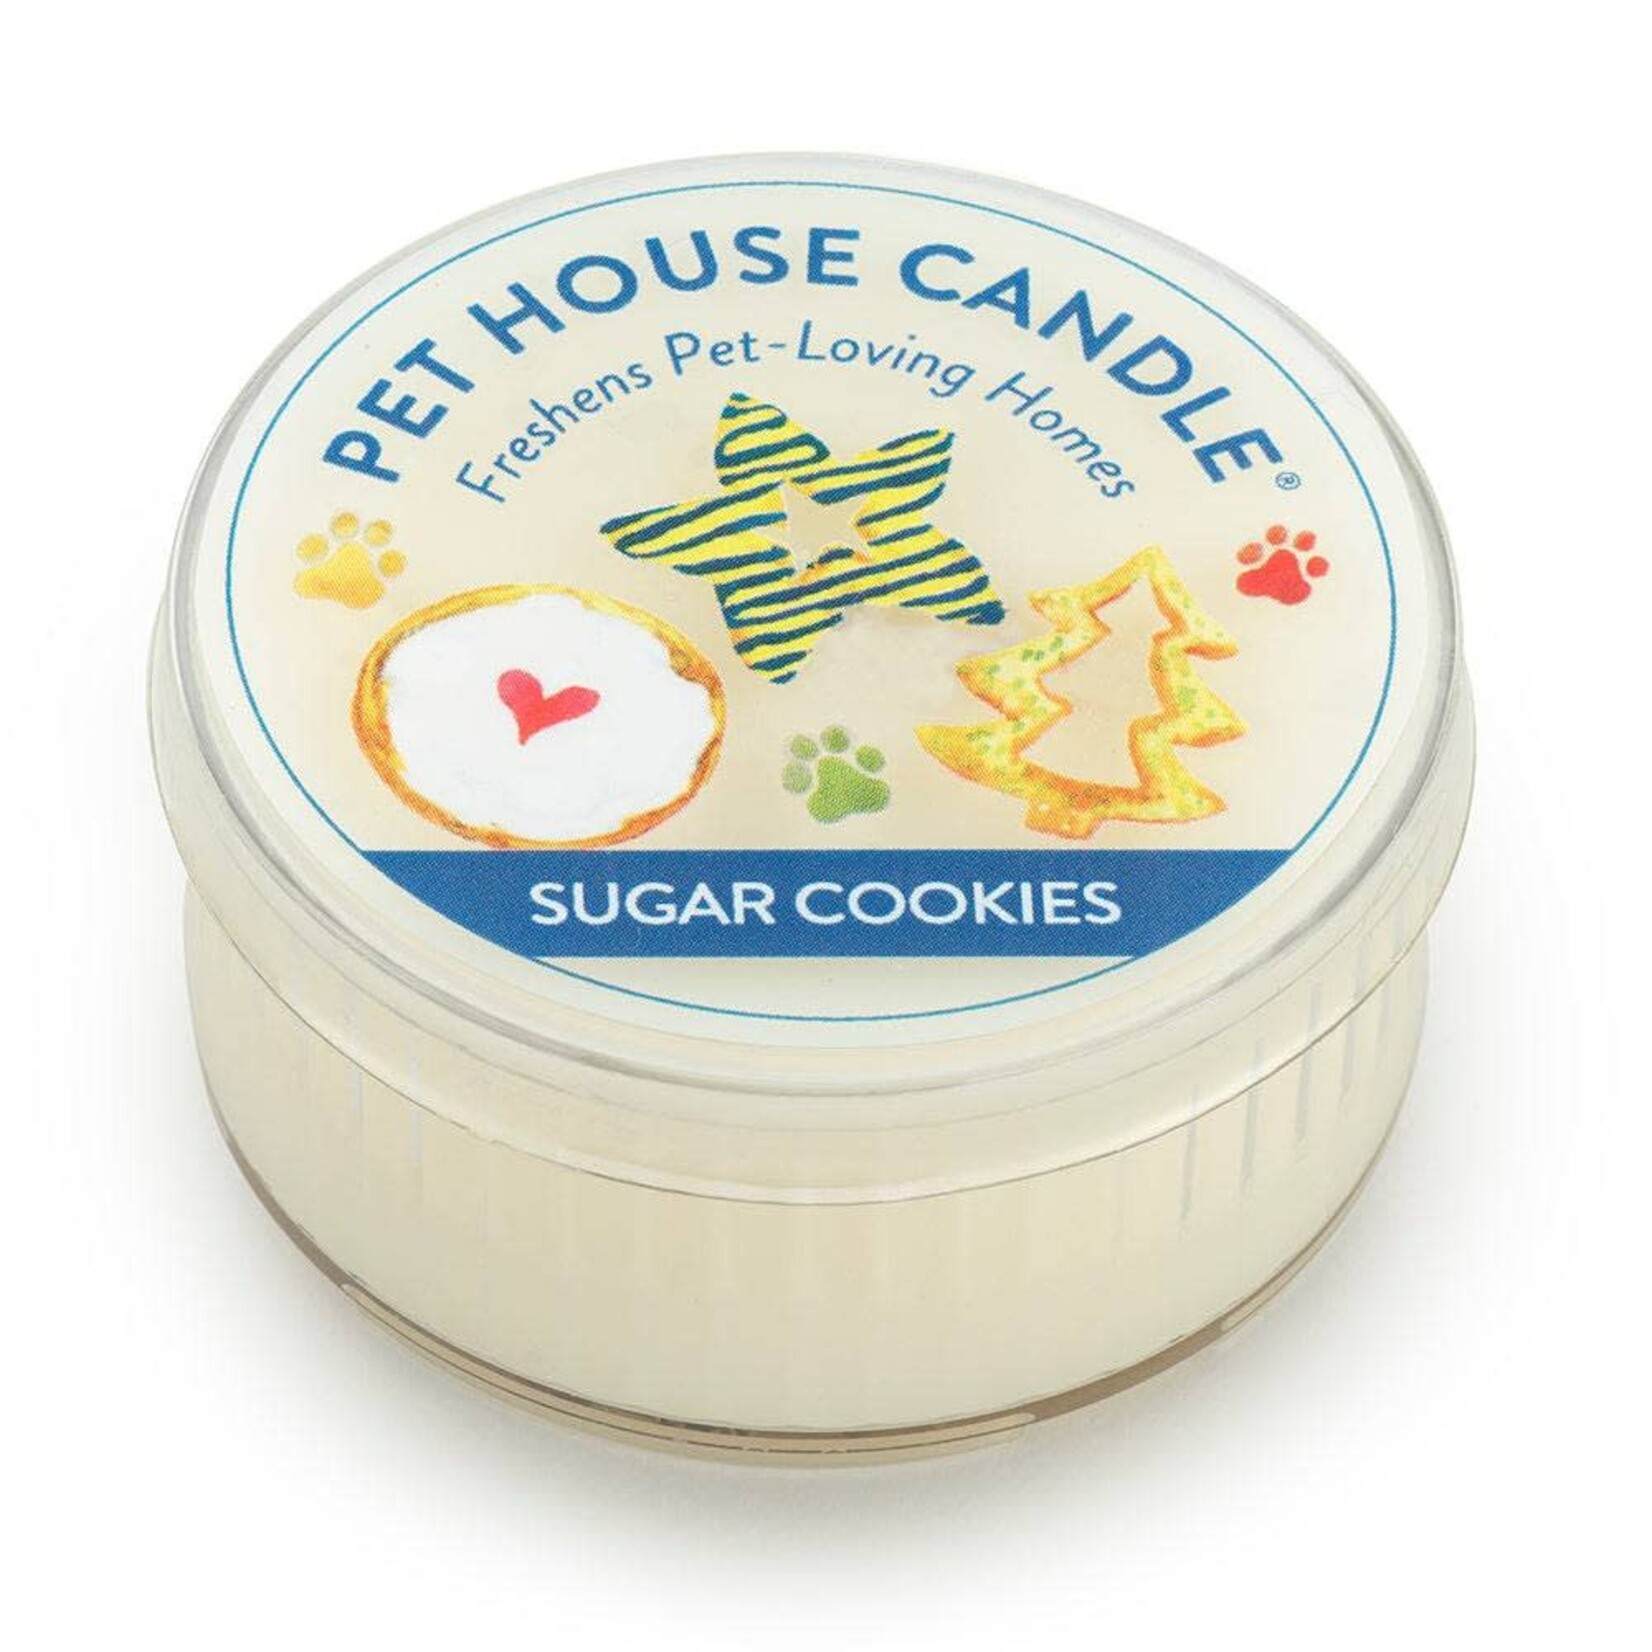 PET HOUSE CANDLE Pet House Mini Candles Sugar Cookies